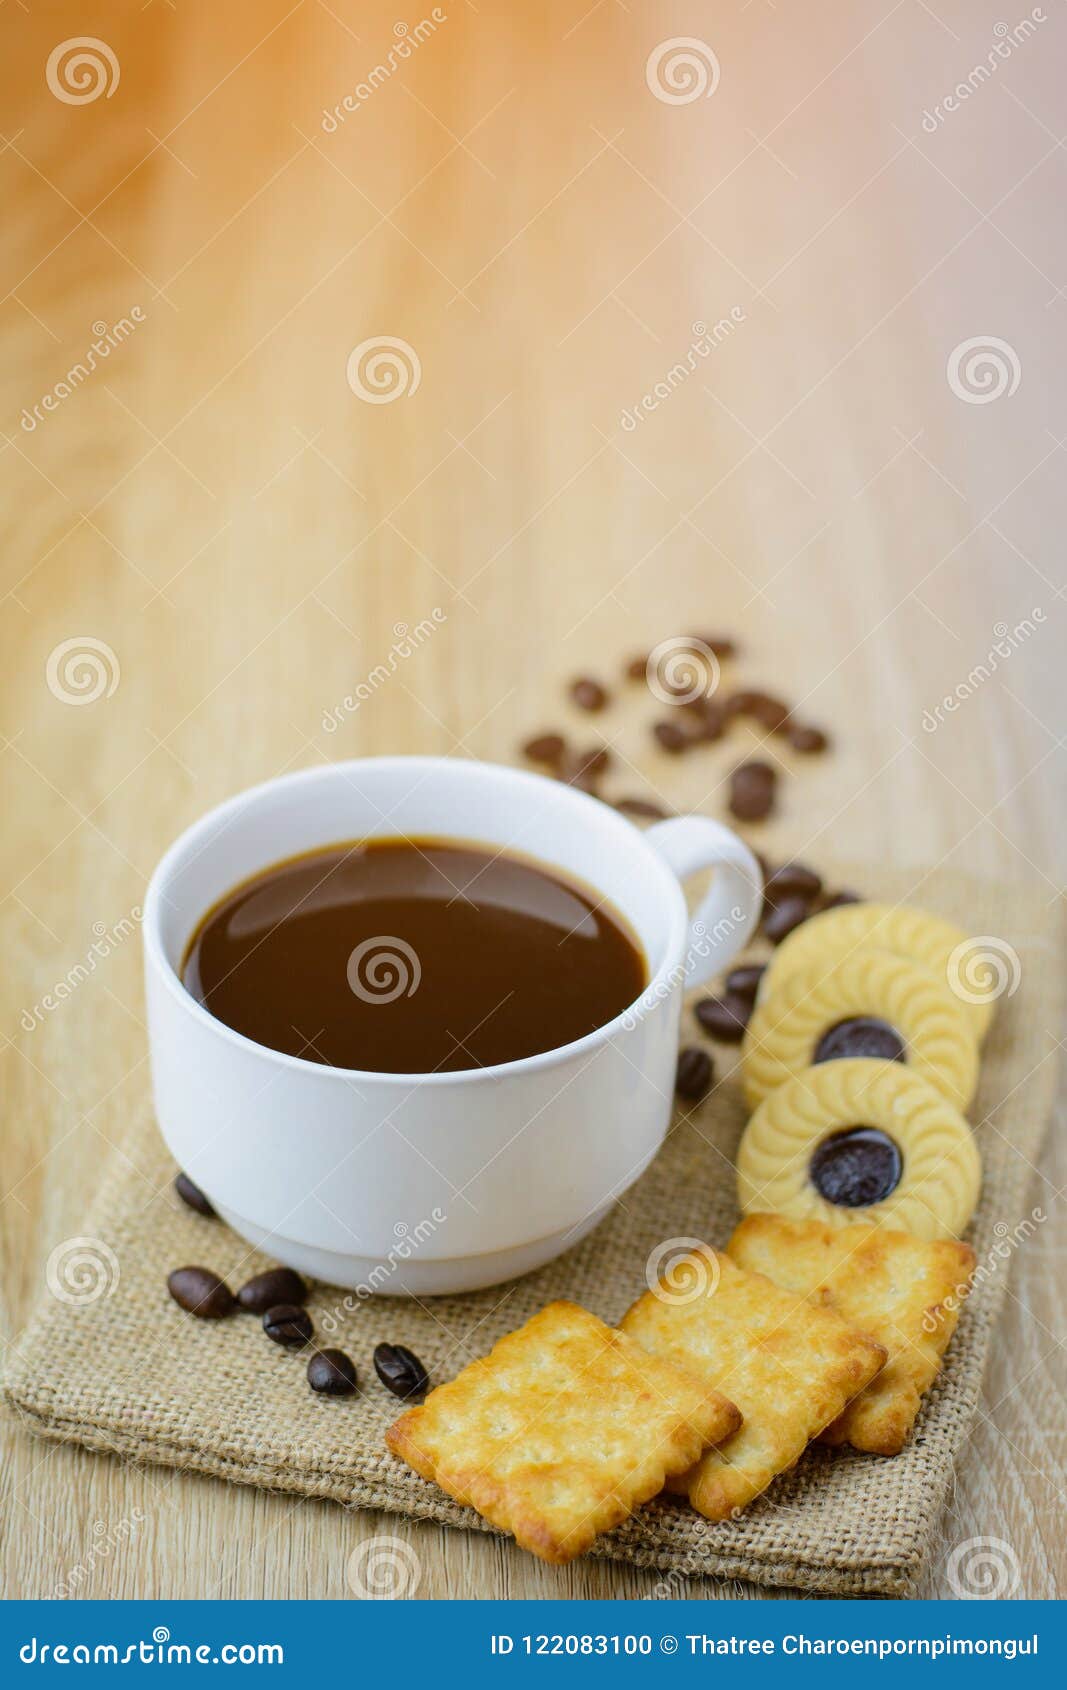 Cup of Coffee with Cracker and Cookie on Wood Table. Stock Photo ...